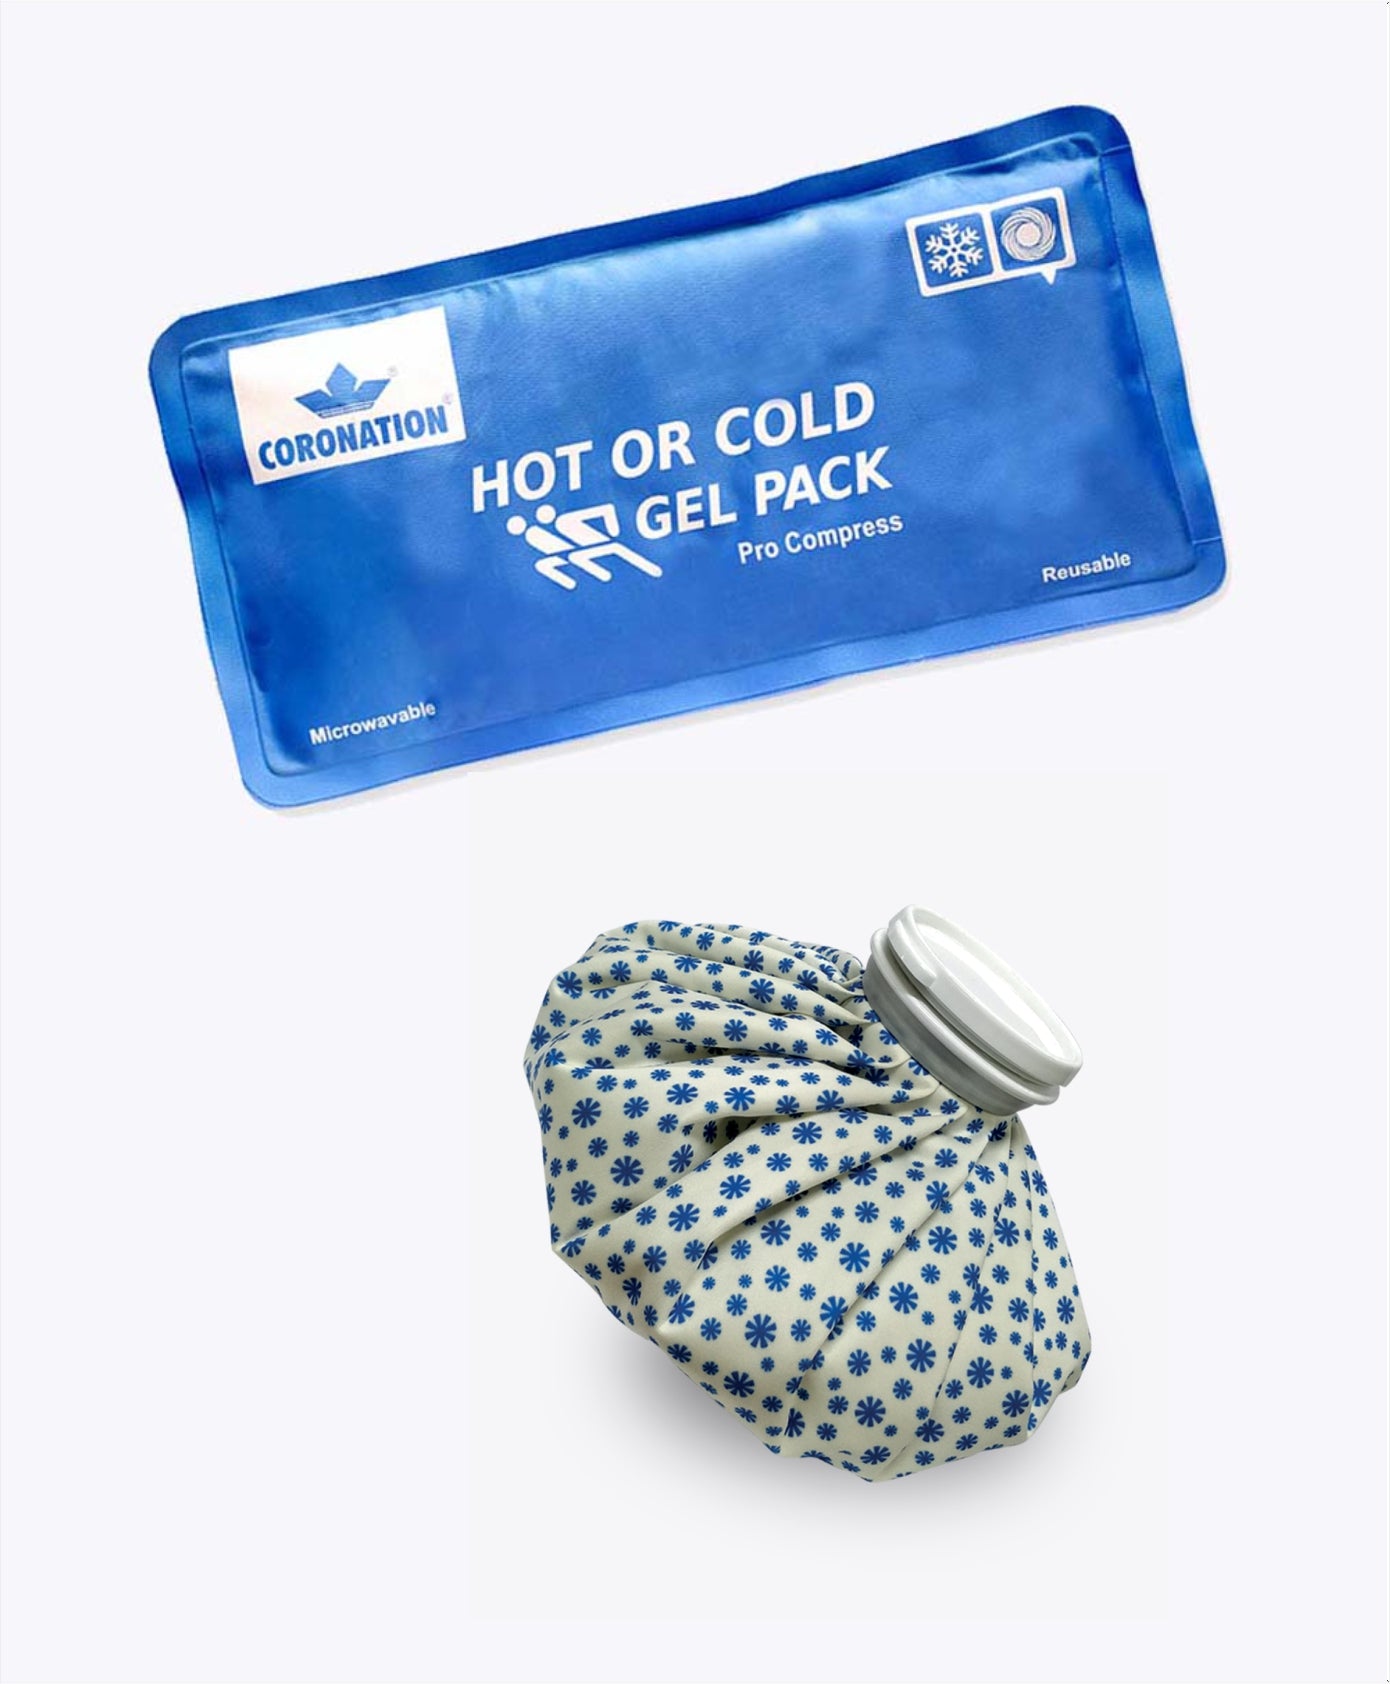 Coronation Ice Bag + Hot & Cold Gel Pack - Pro Compress Combo